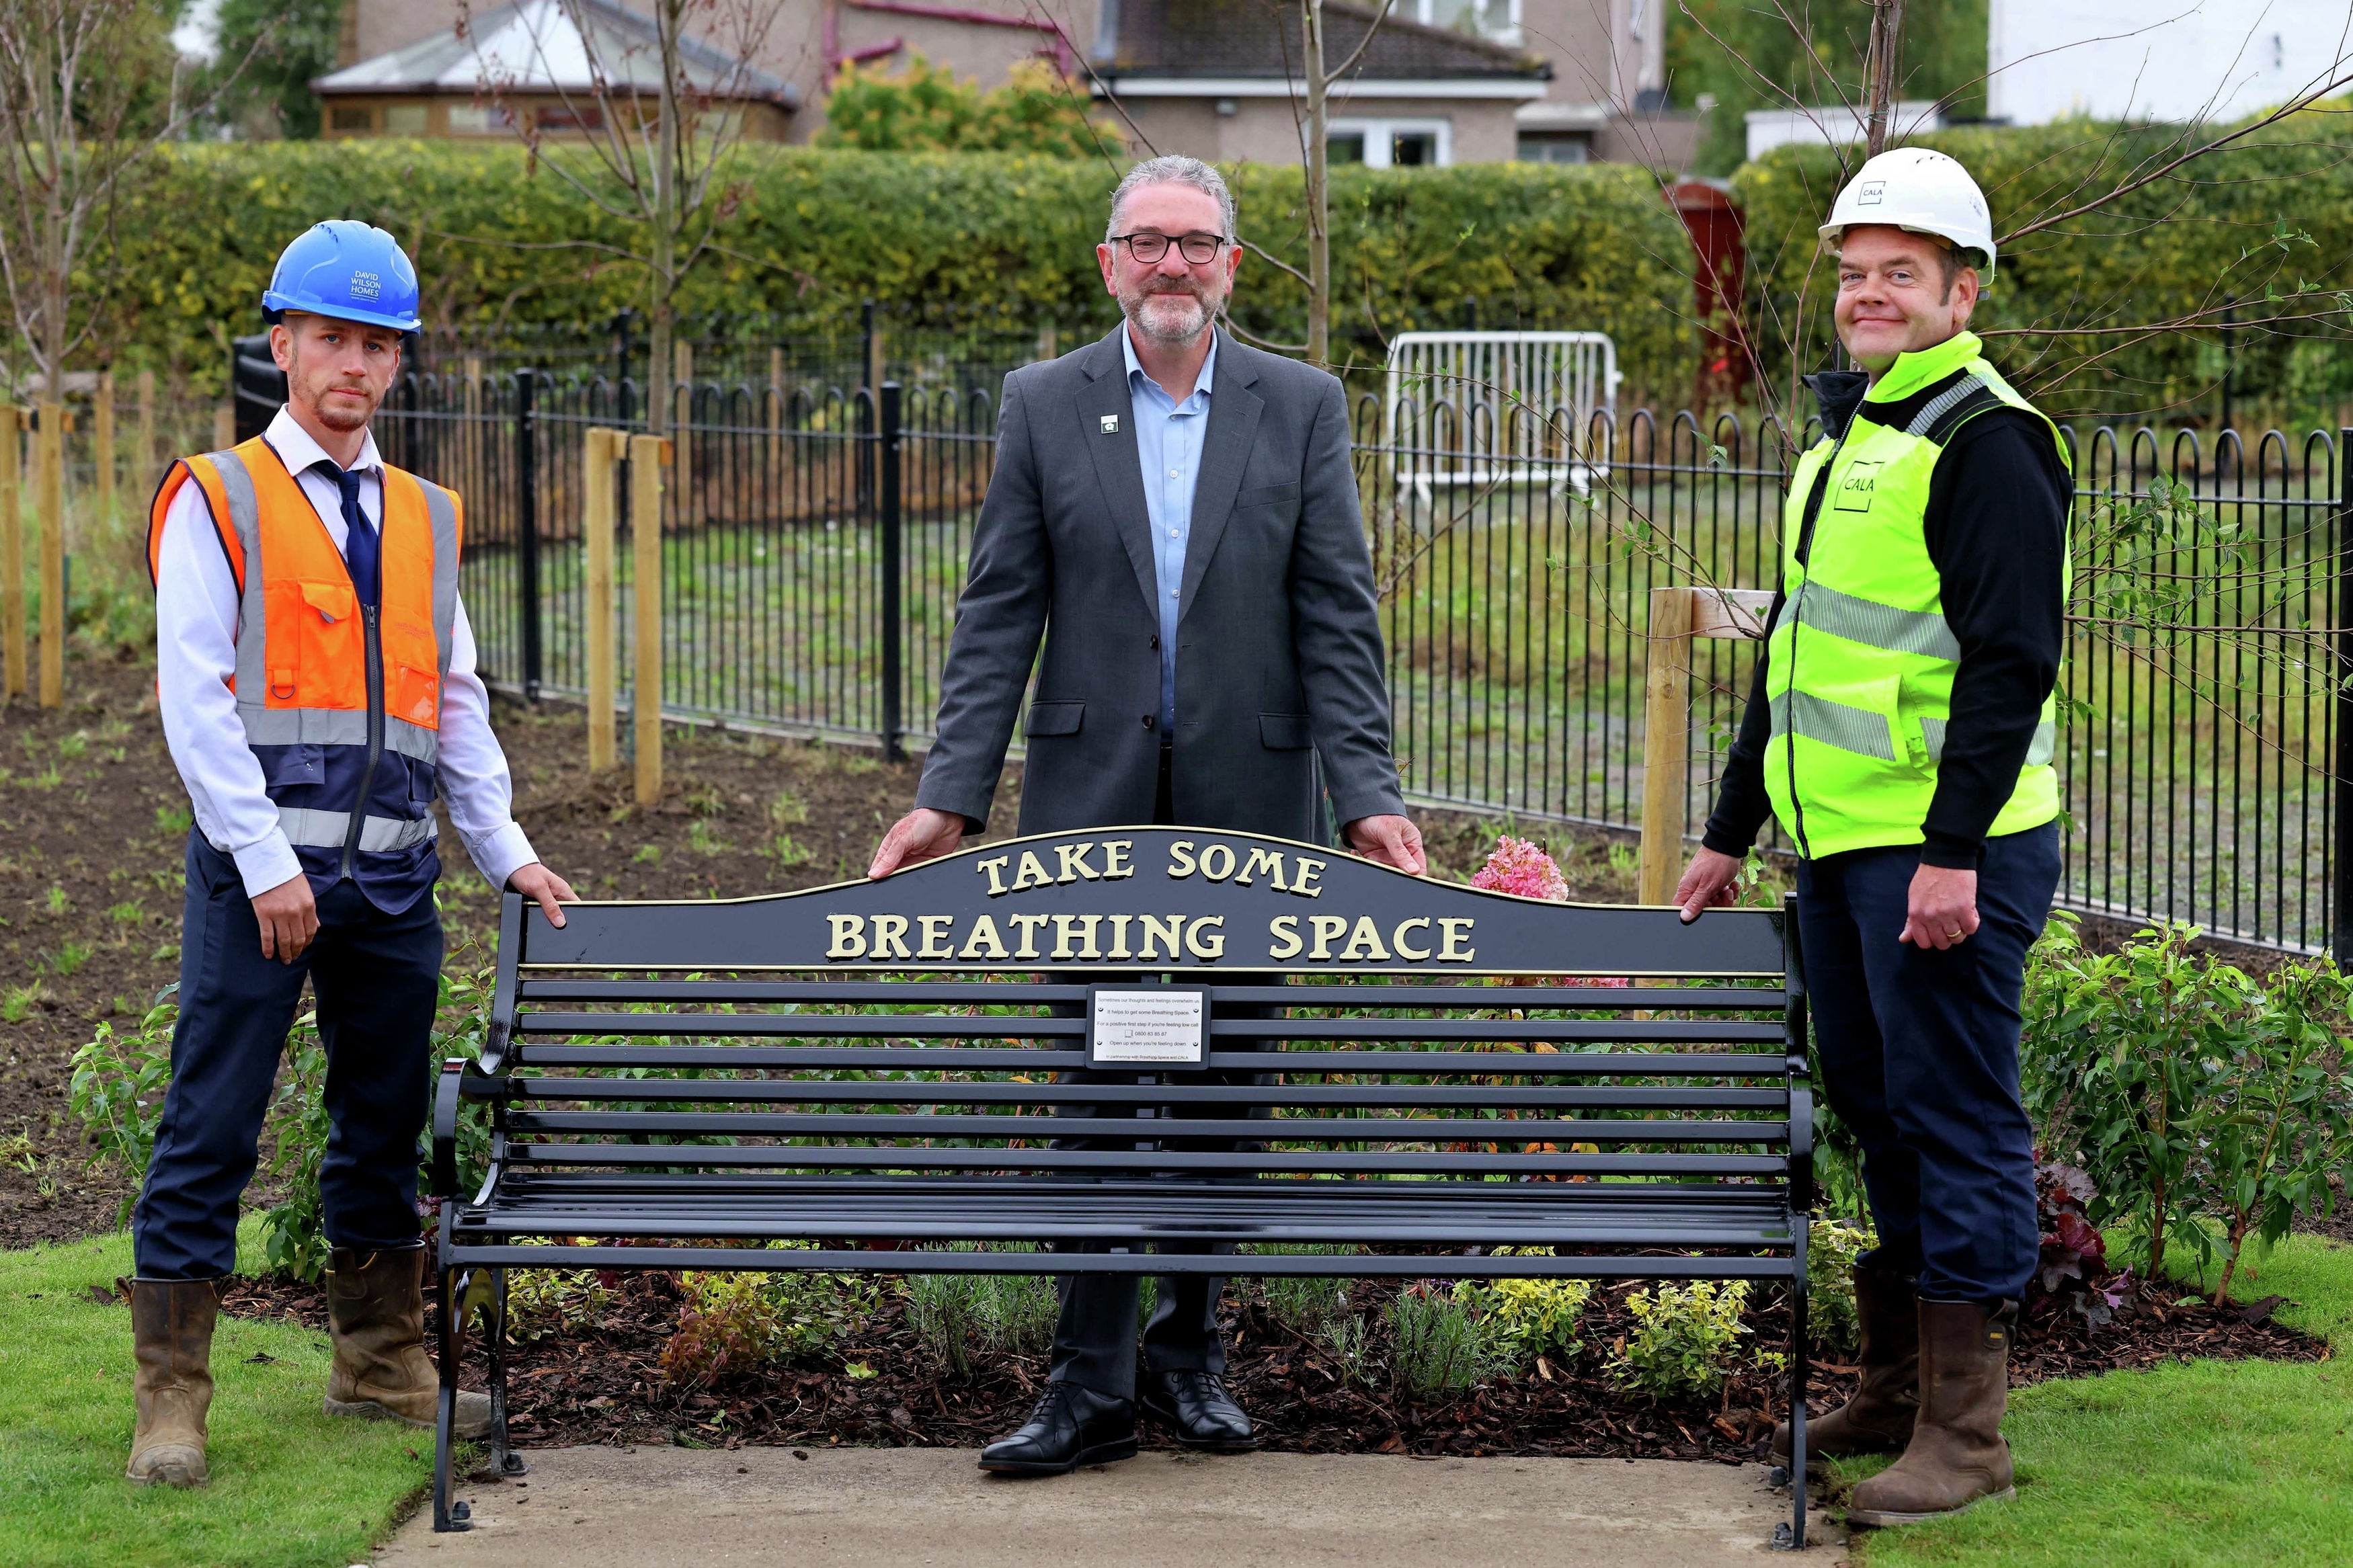 Cala Homes unveils two new Breathing Space benches at Edinburgh development